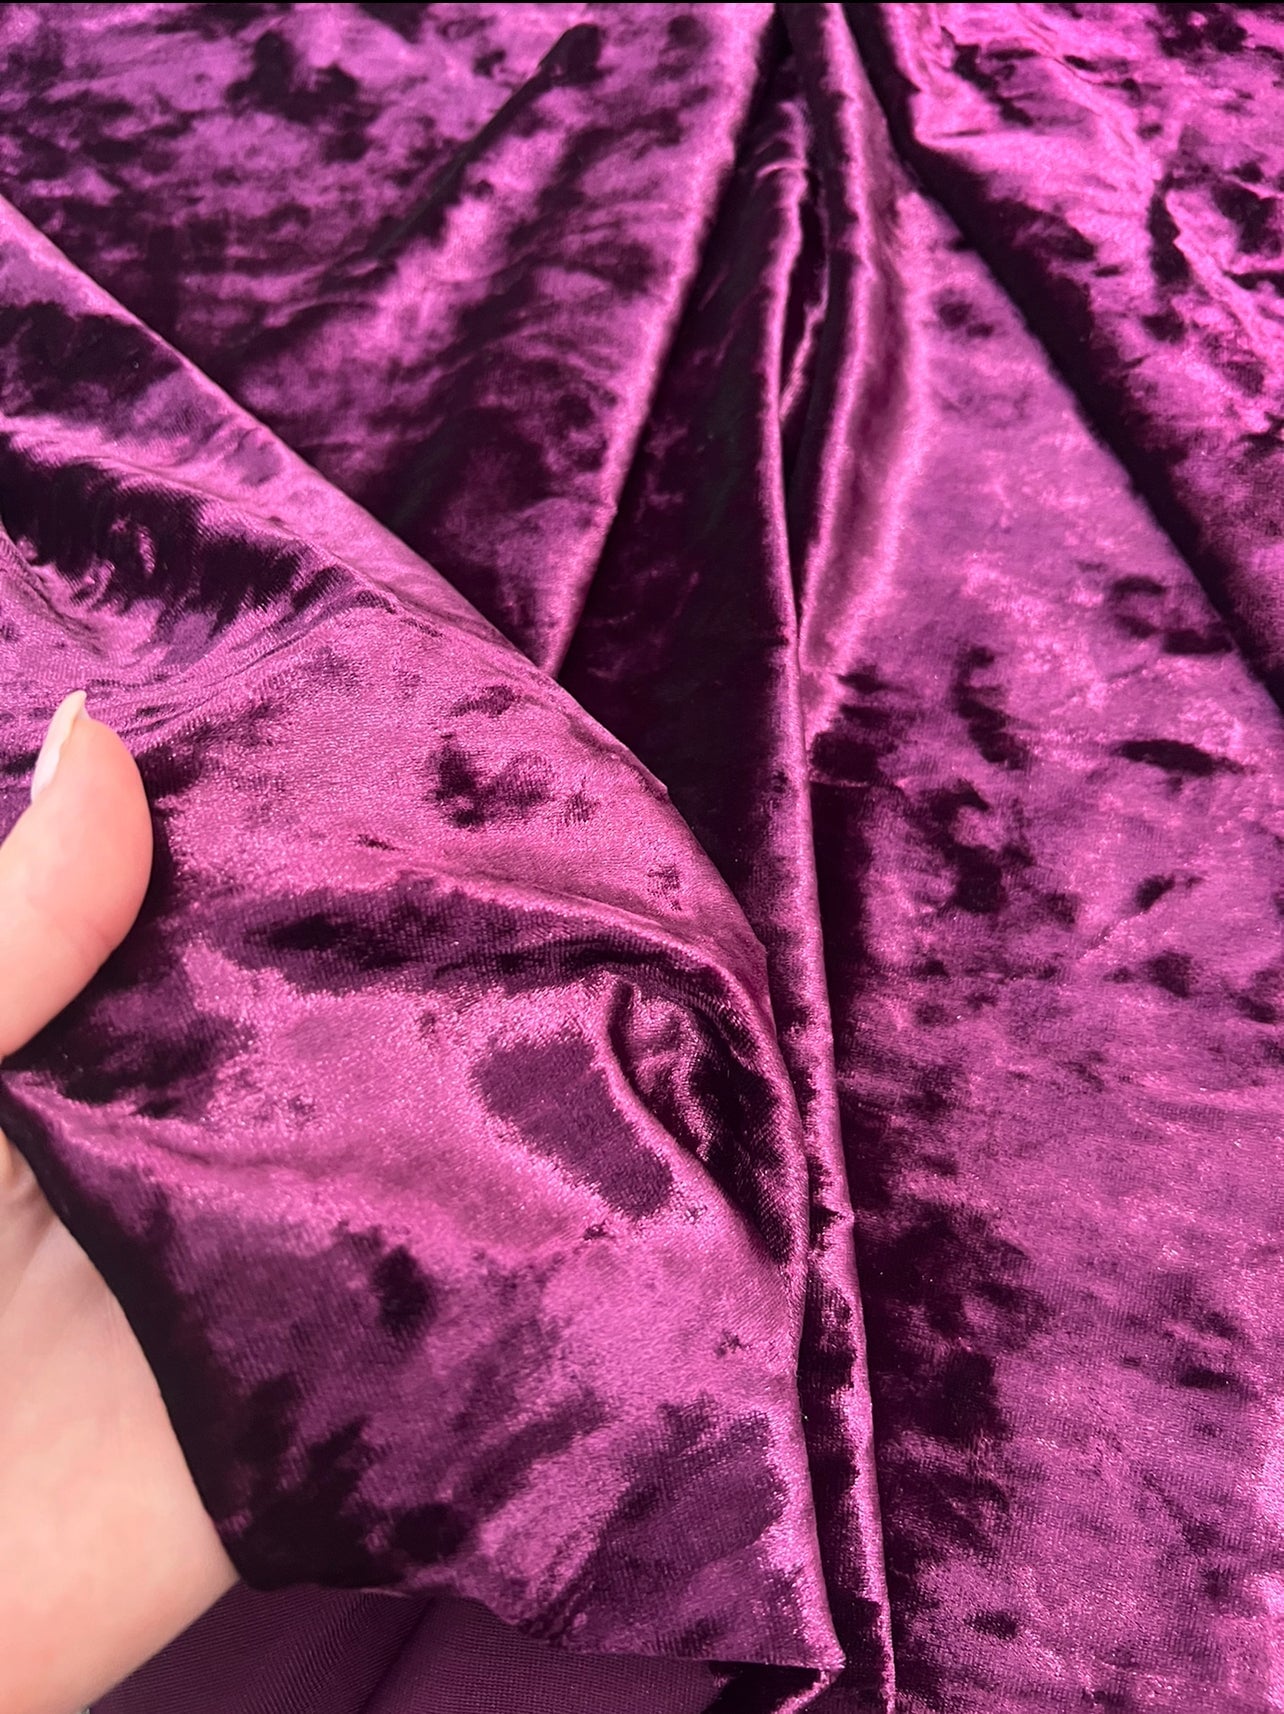 Plum Stretched Crushed Velvet, maroon Stretched Crushed Velvet, burgundy Stretched Crushed Velvet, Crushed Velvet, stretched velvet, velvet for woman, velvet for bride, velvet for party wear dresses, velvet on discount, velvet on sale, buy velvet online